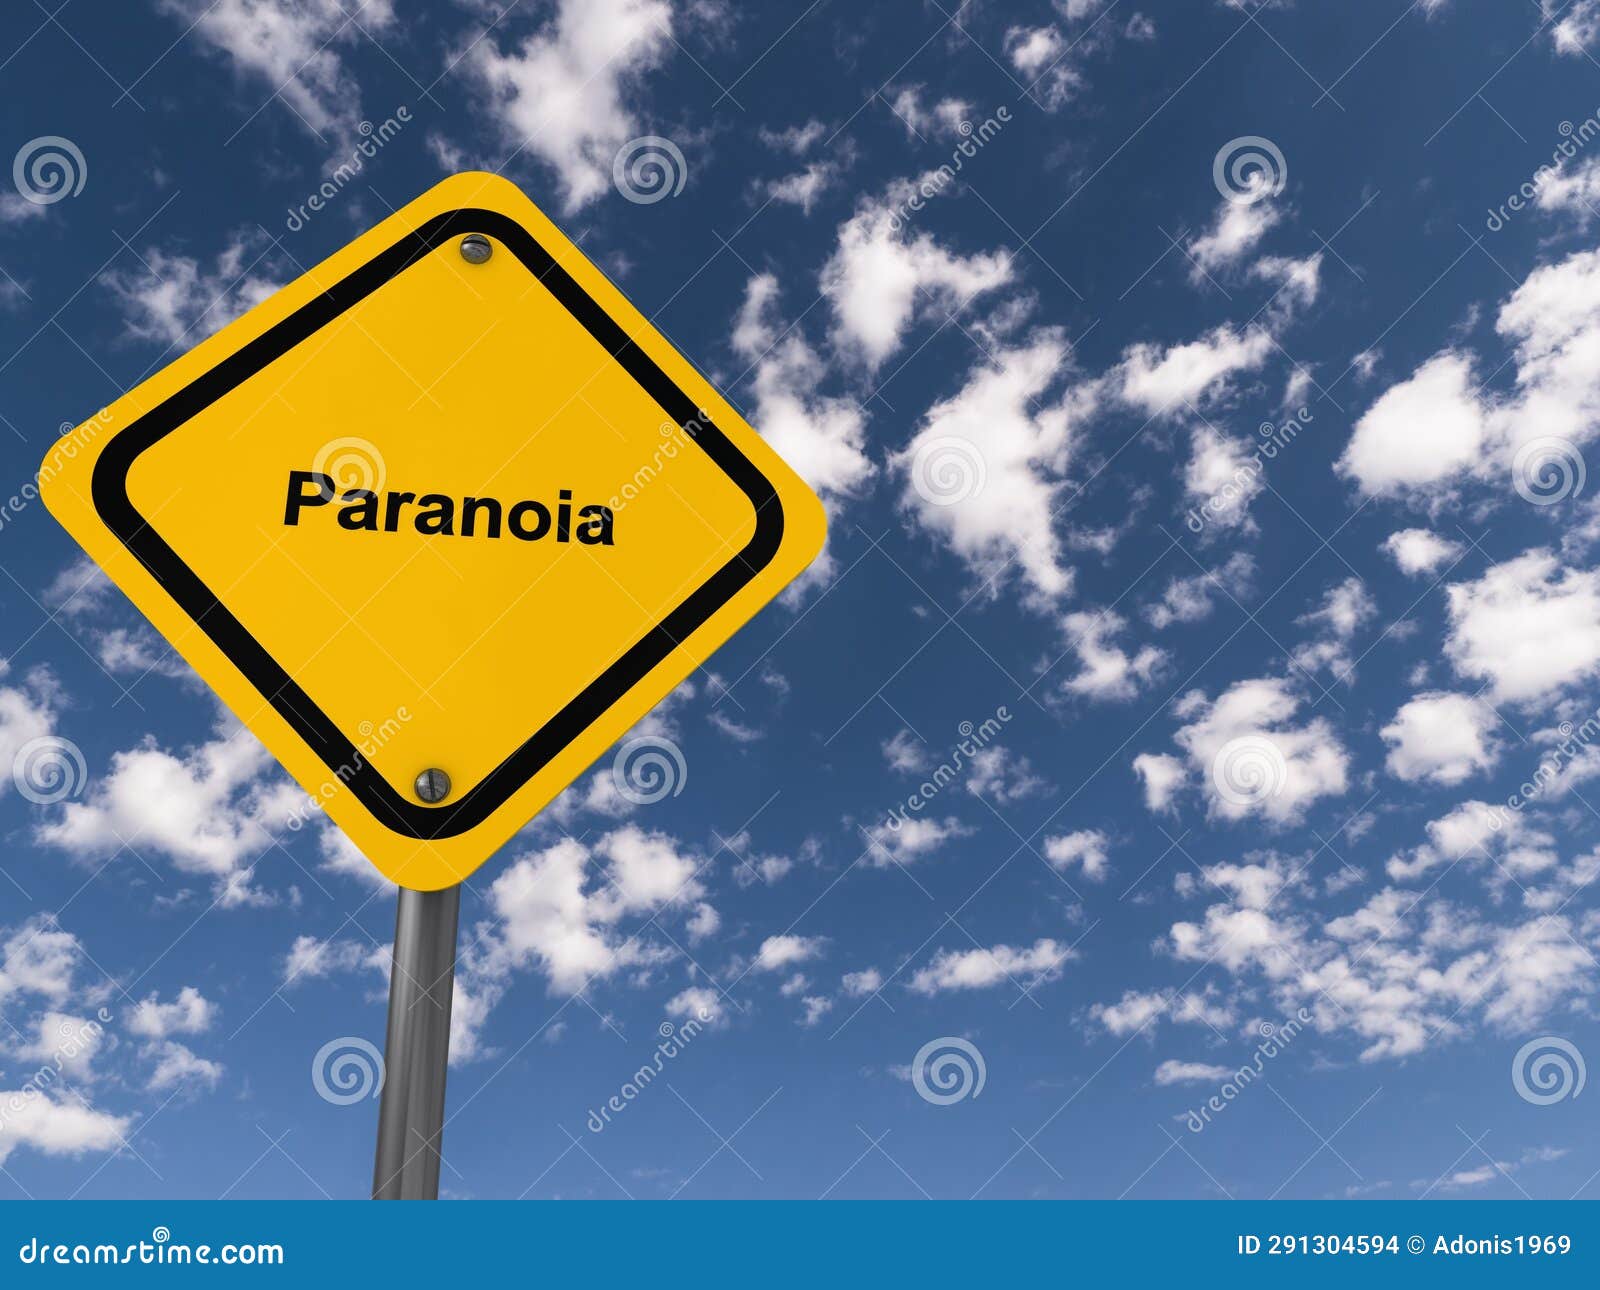 paranoia traffic sign on blue sky